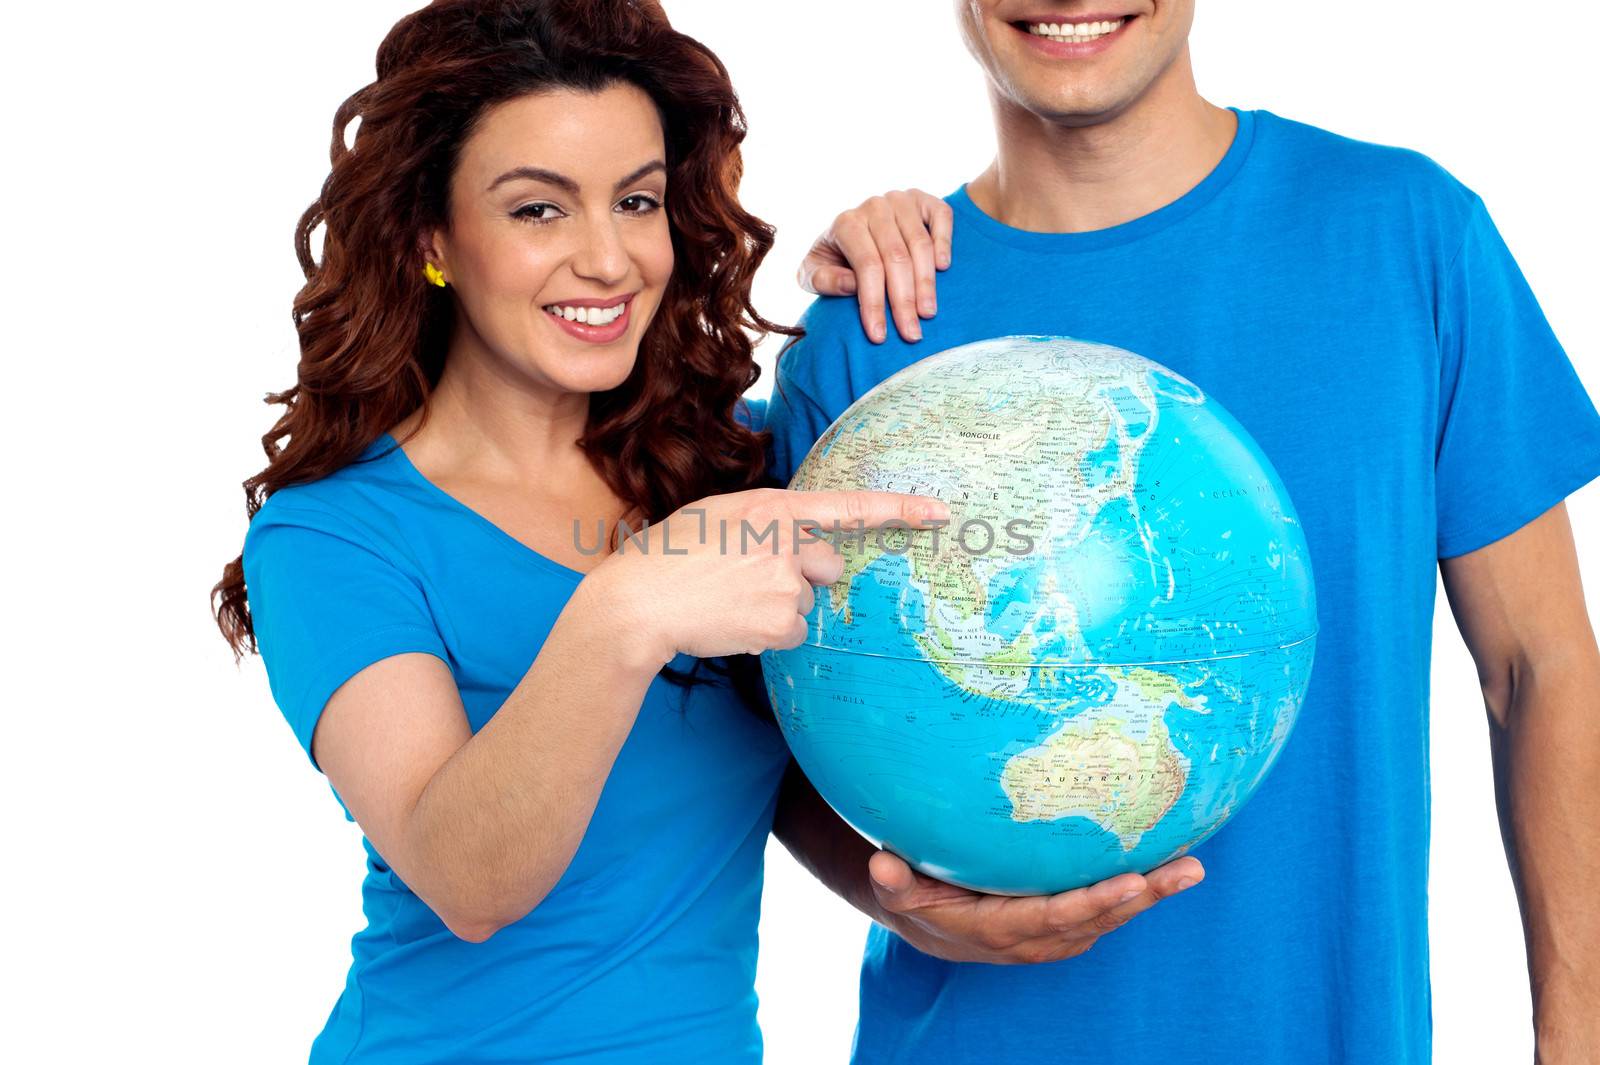 Woman pointing at China on globe while man holds it. Cropped image, man smiling